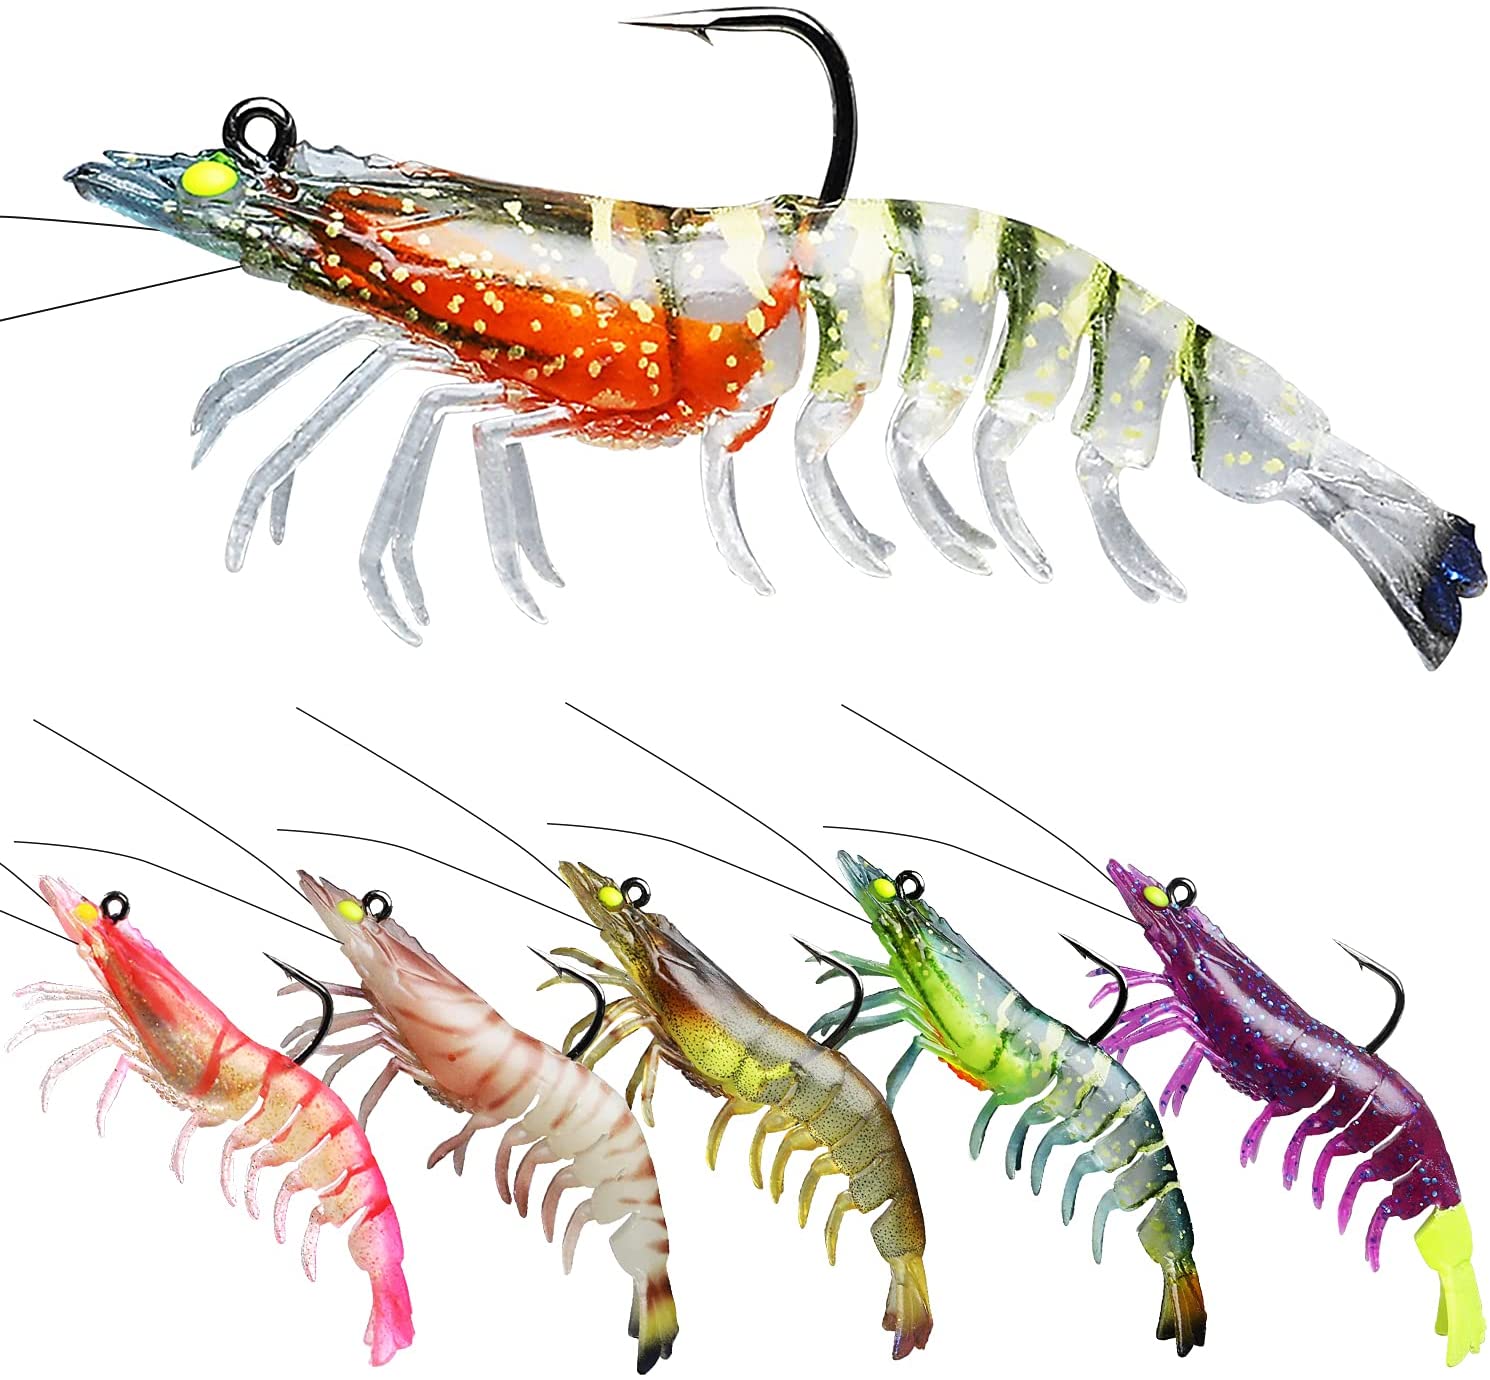 TRUSCEND Pre-Rigged Fishing Lures, Shrimp Lure with VMC Hook From $6.99